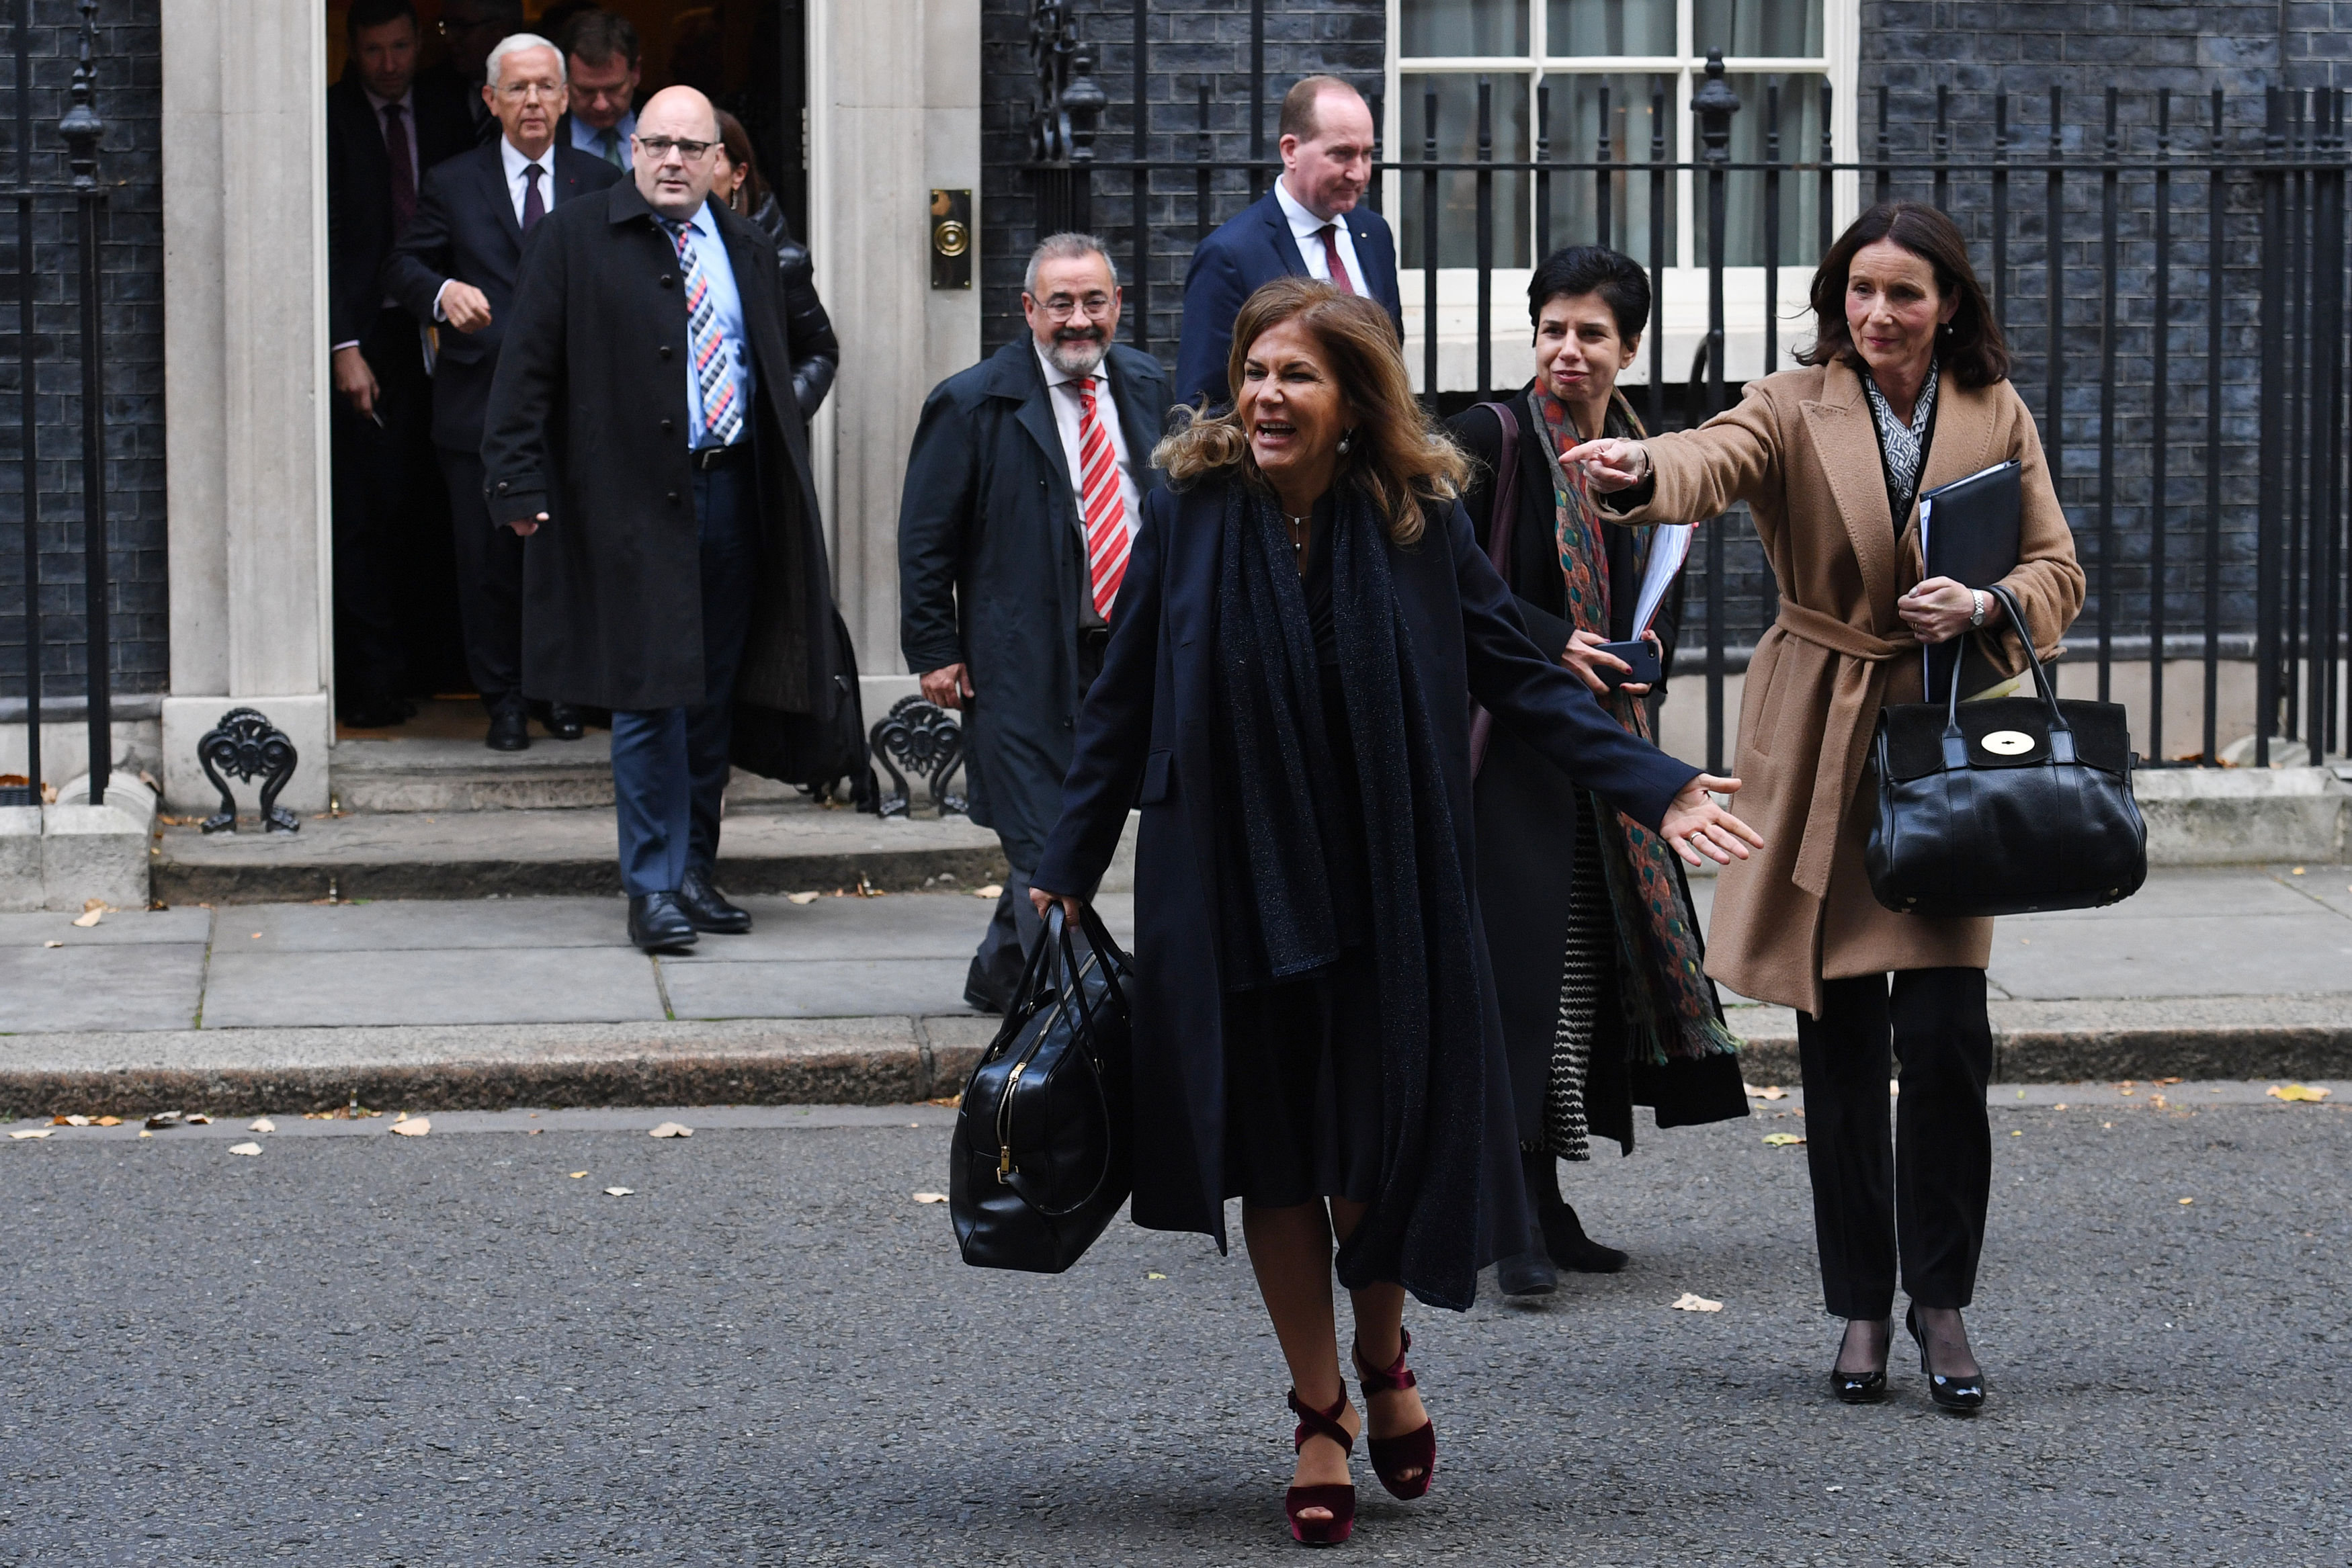 <i>BusinessEurope president Emma Marcegagia (front) and CBI director general Carolyn Fairbairn (right) leaving 10 Downing Street&nbsp; after a meeting between business leaders from Europe and Theresa May.</i>